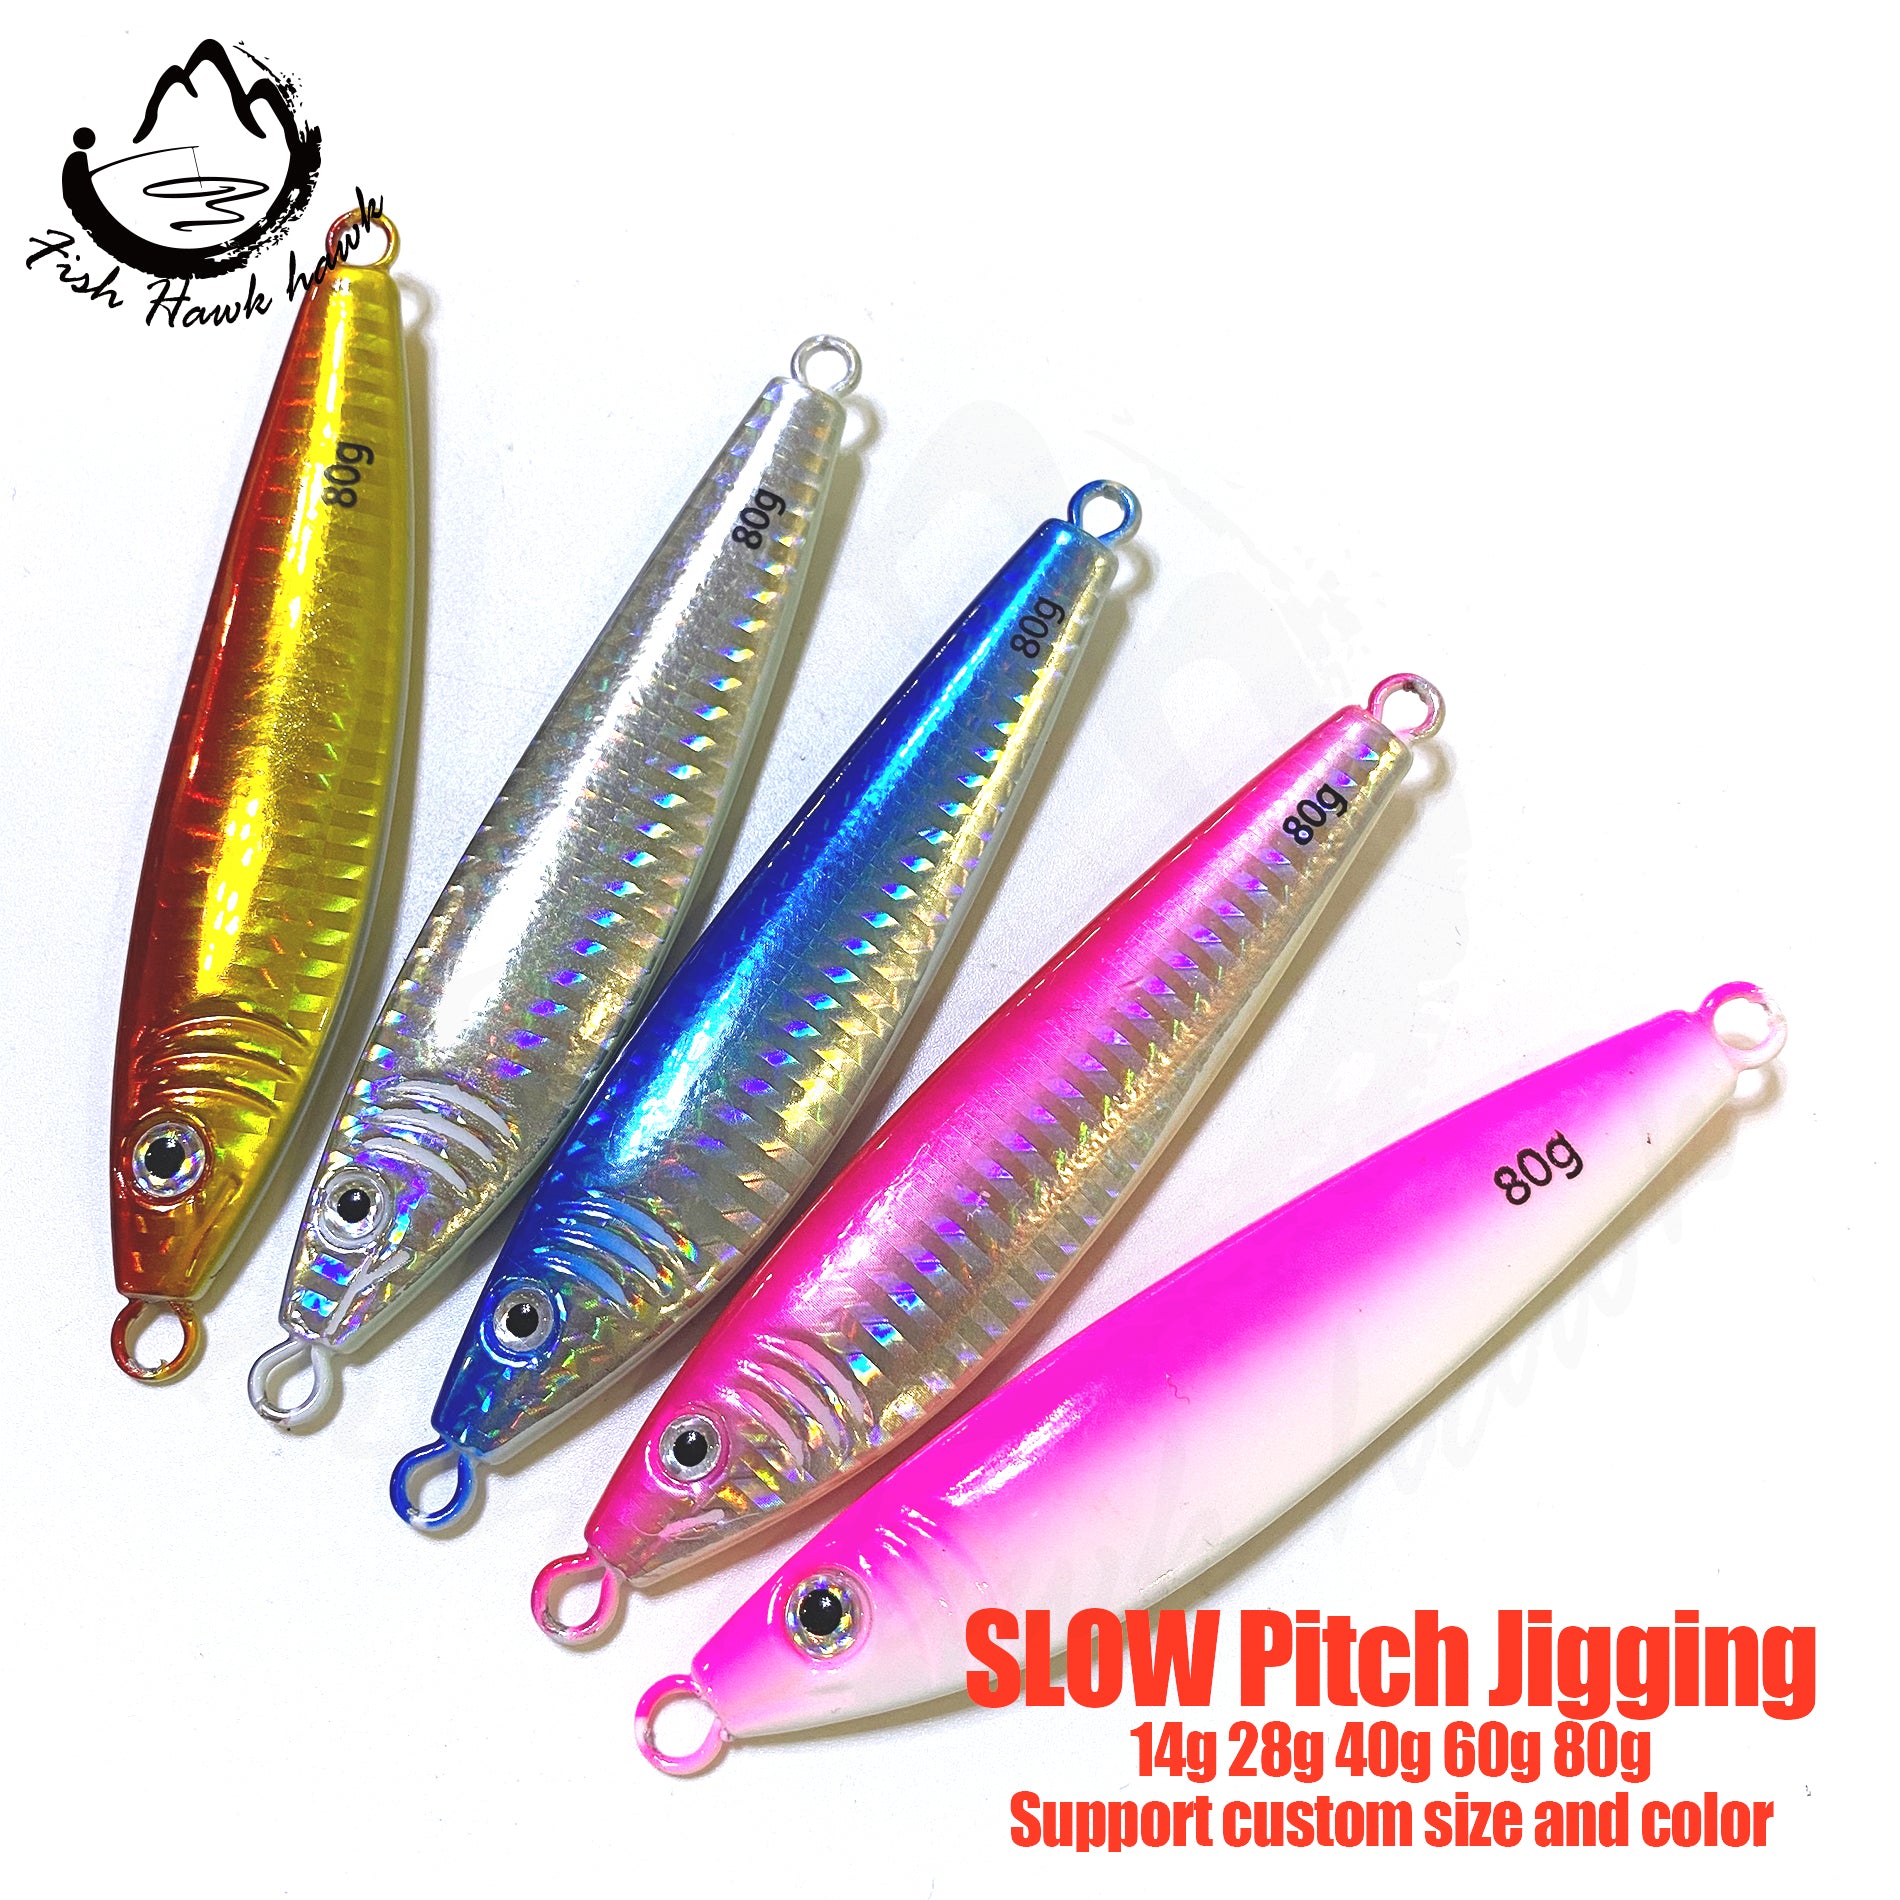 84 Speed/Slow Pitch Jigs Bait 14g 28g 40g 60g 80g – Jigs Fishing Tackle  Store